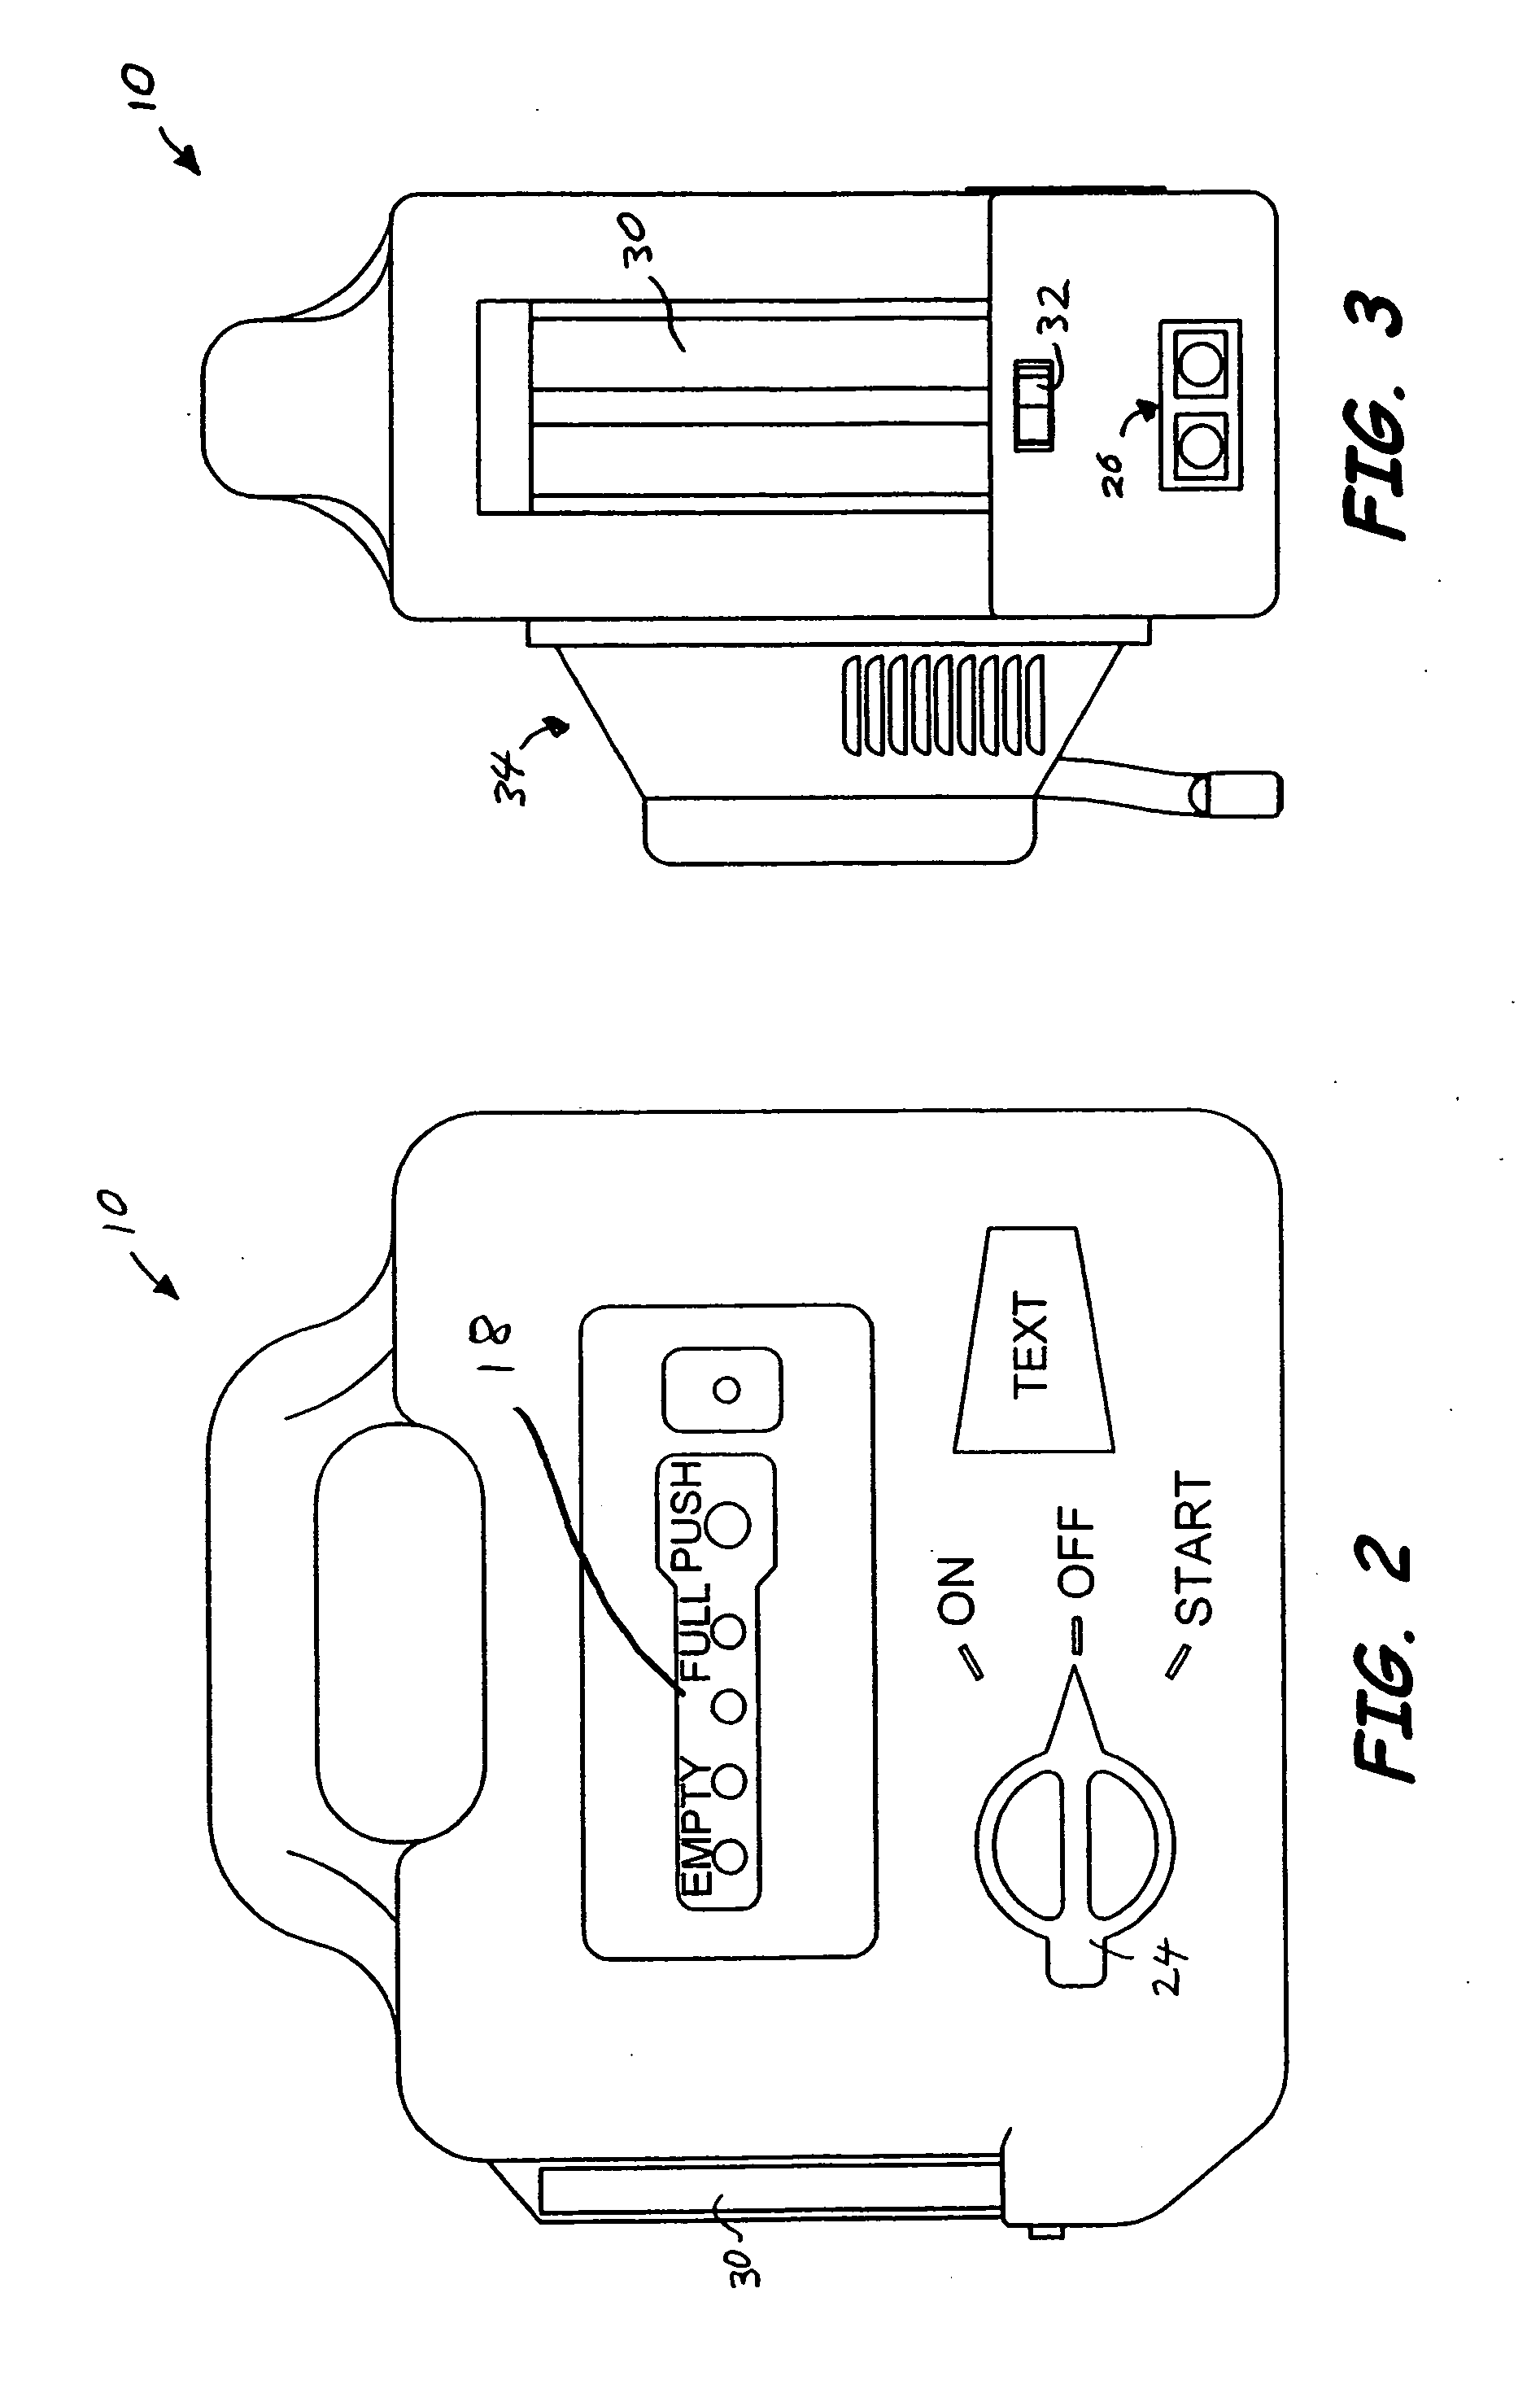 Method of and system for starting engine-driven power equipment